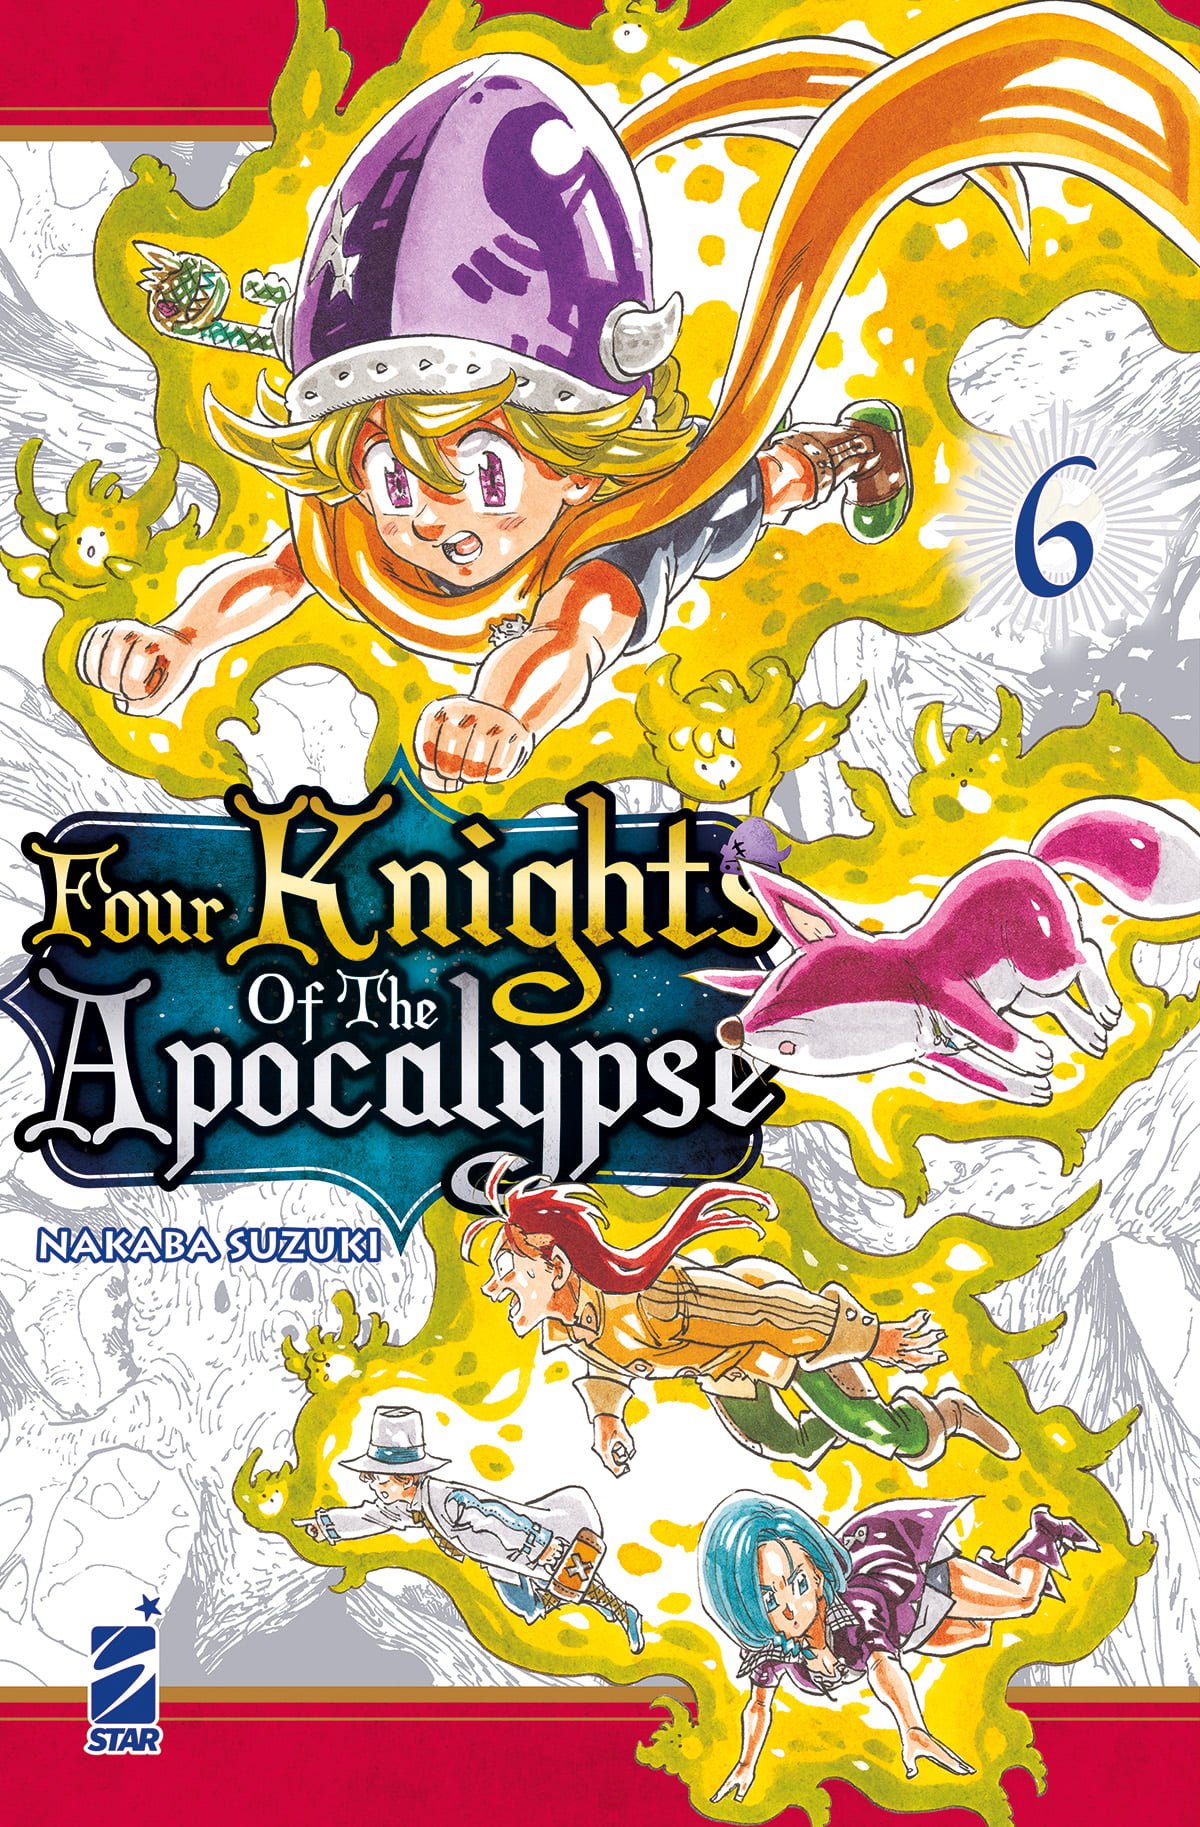 FOUR KNIGHTS OF THE APOCALYPSE 6 STARDUST 113